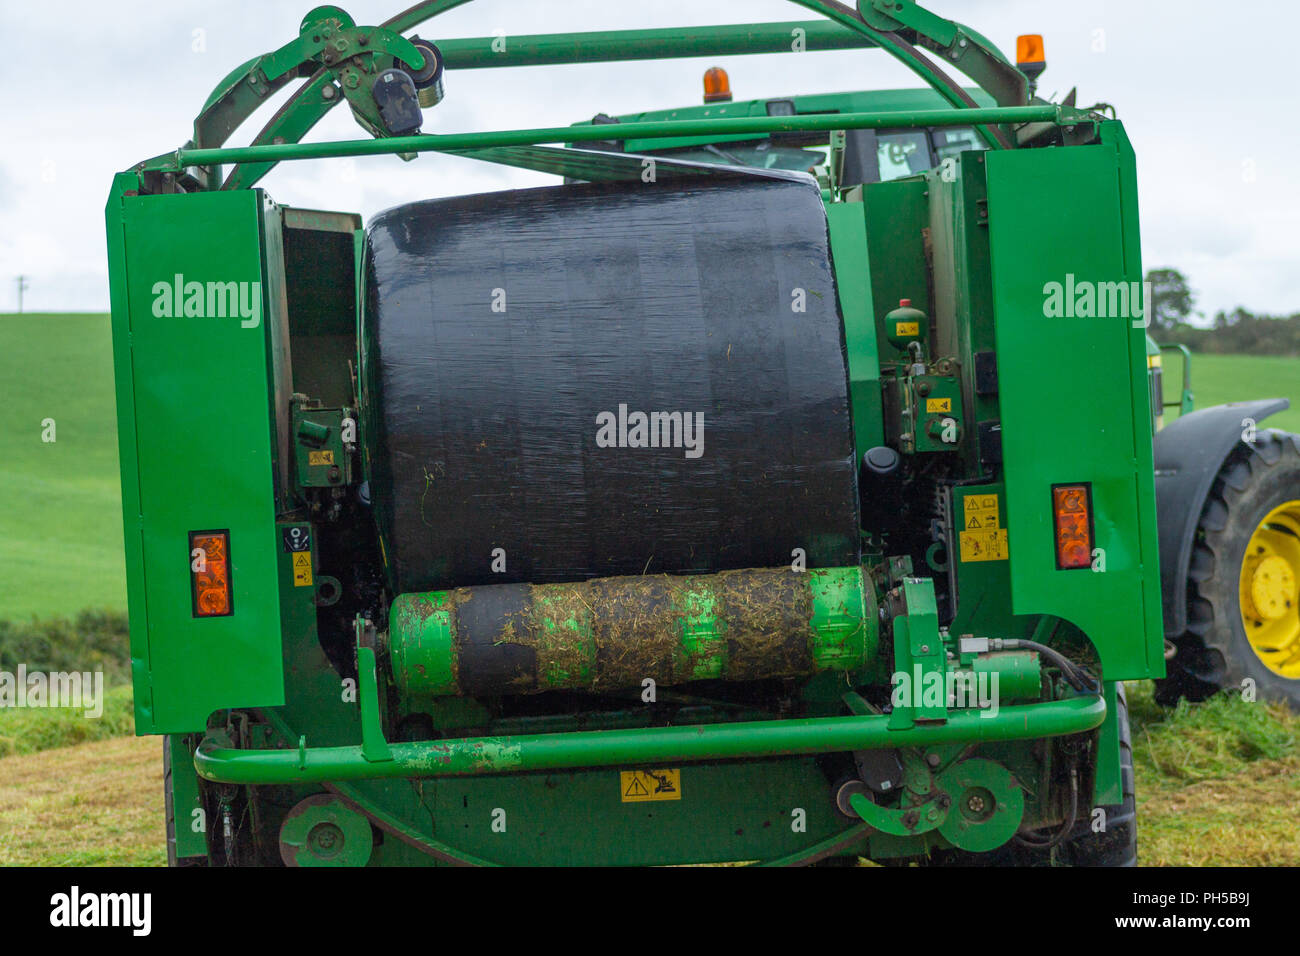 McHale baler baling silage in black plastic sheet on a farm in ireland Stock Photo